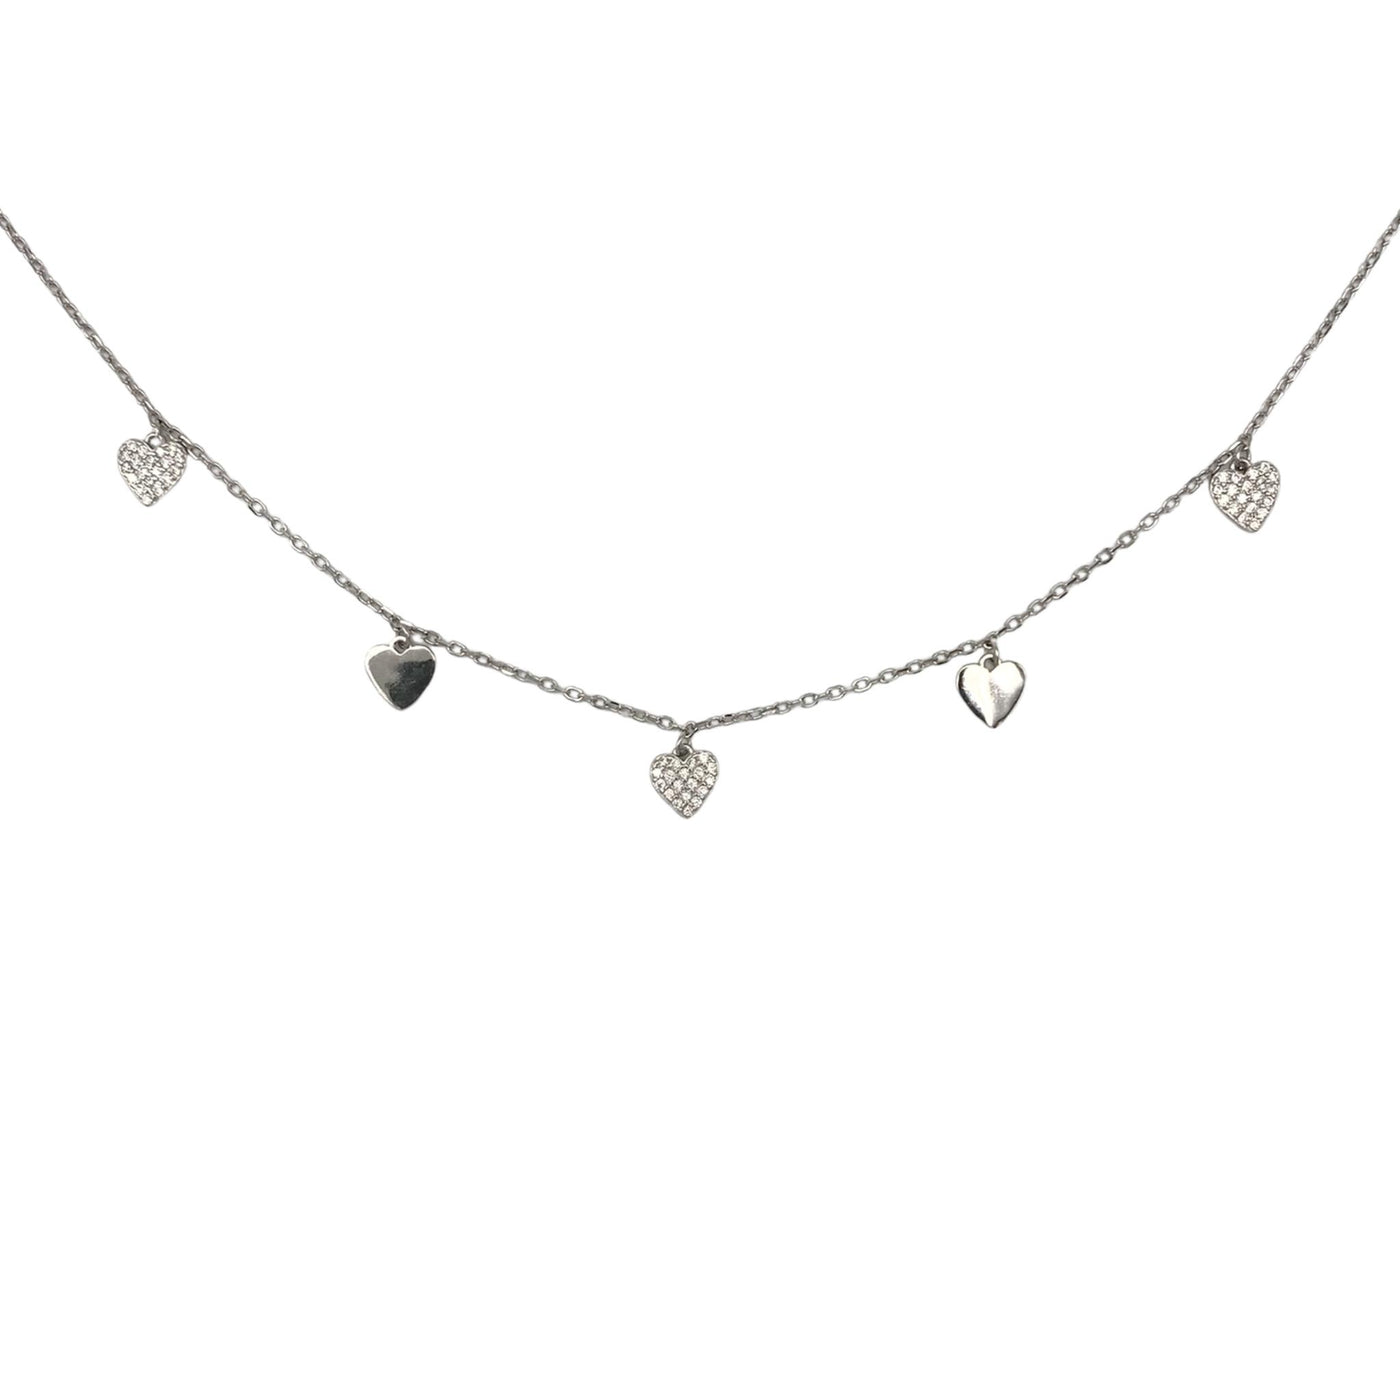 Silver hearts charms necklace